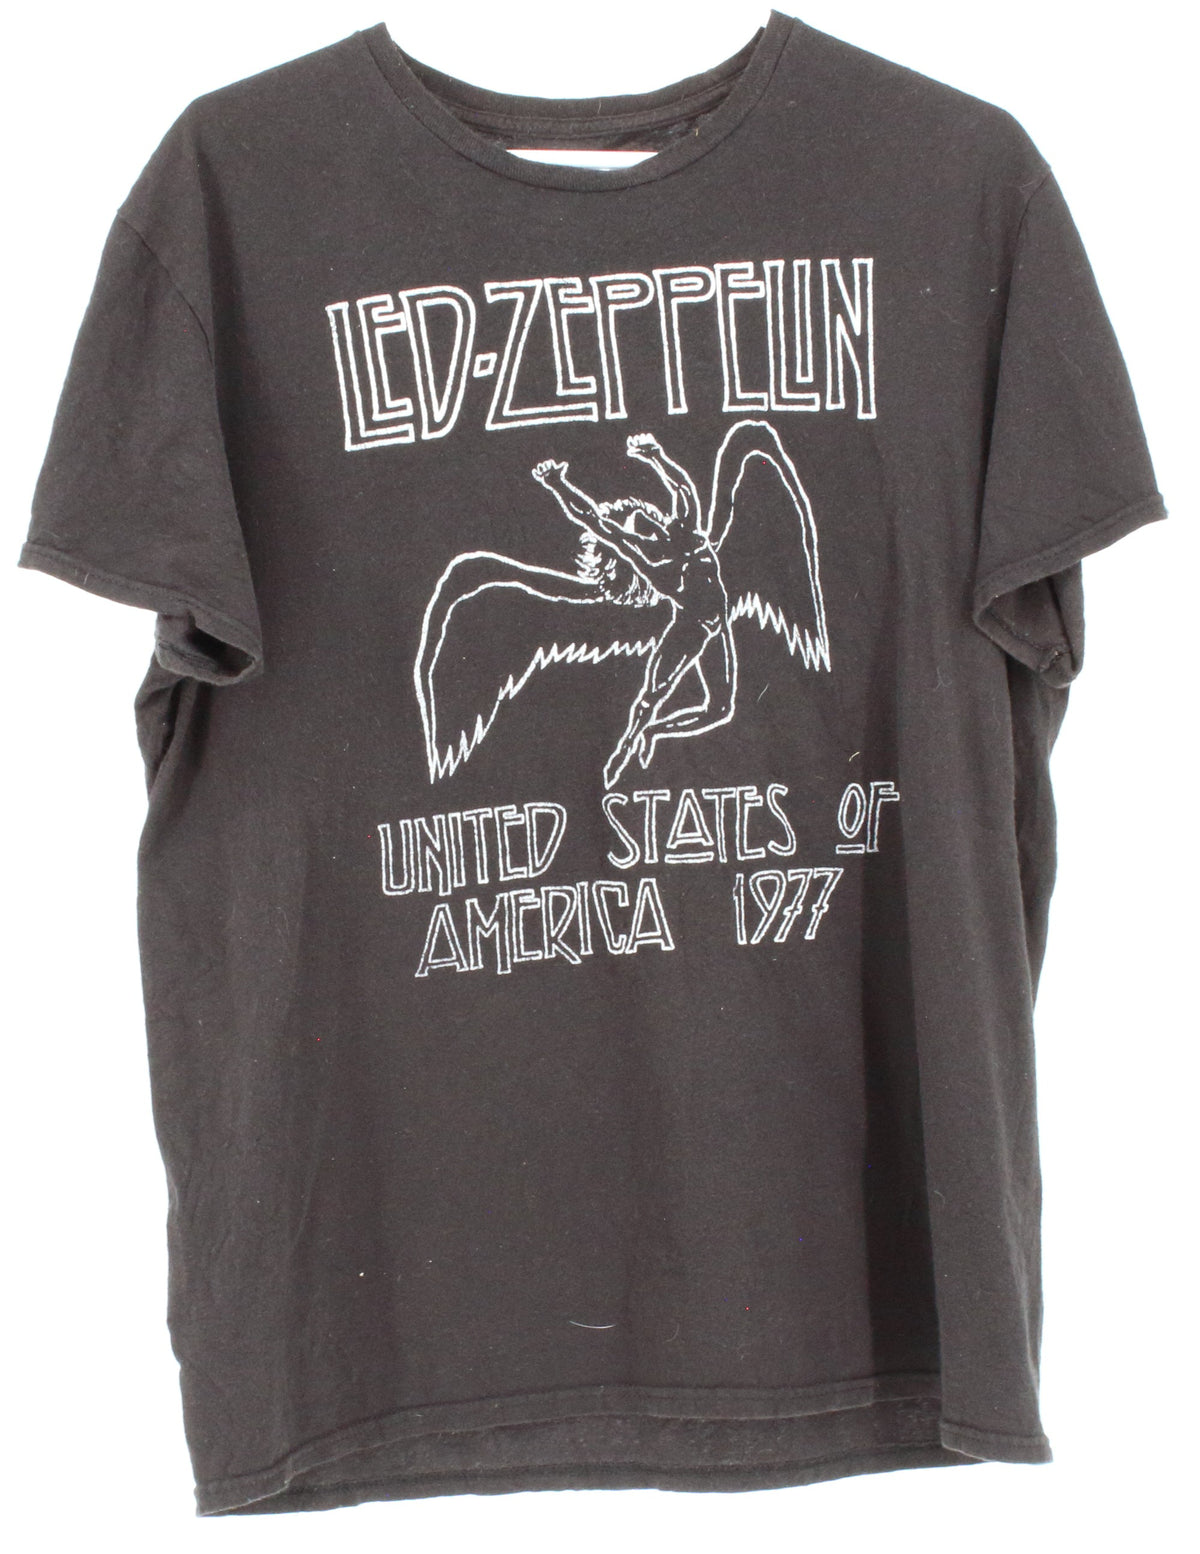 Led Zeppelin USA 1977 Front Graphic Print Black Band T-Shirt